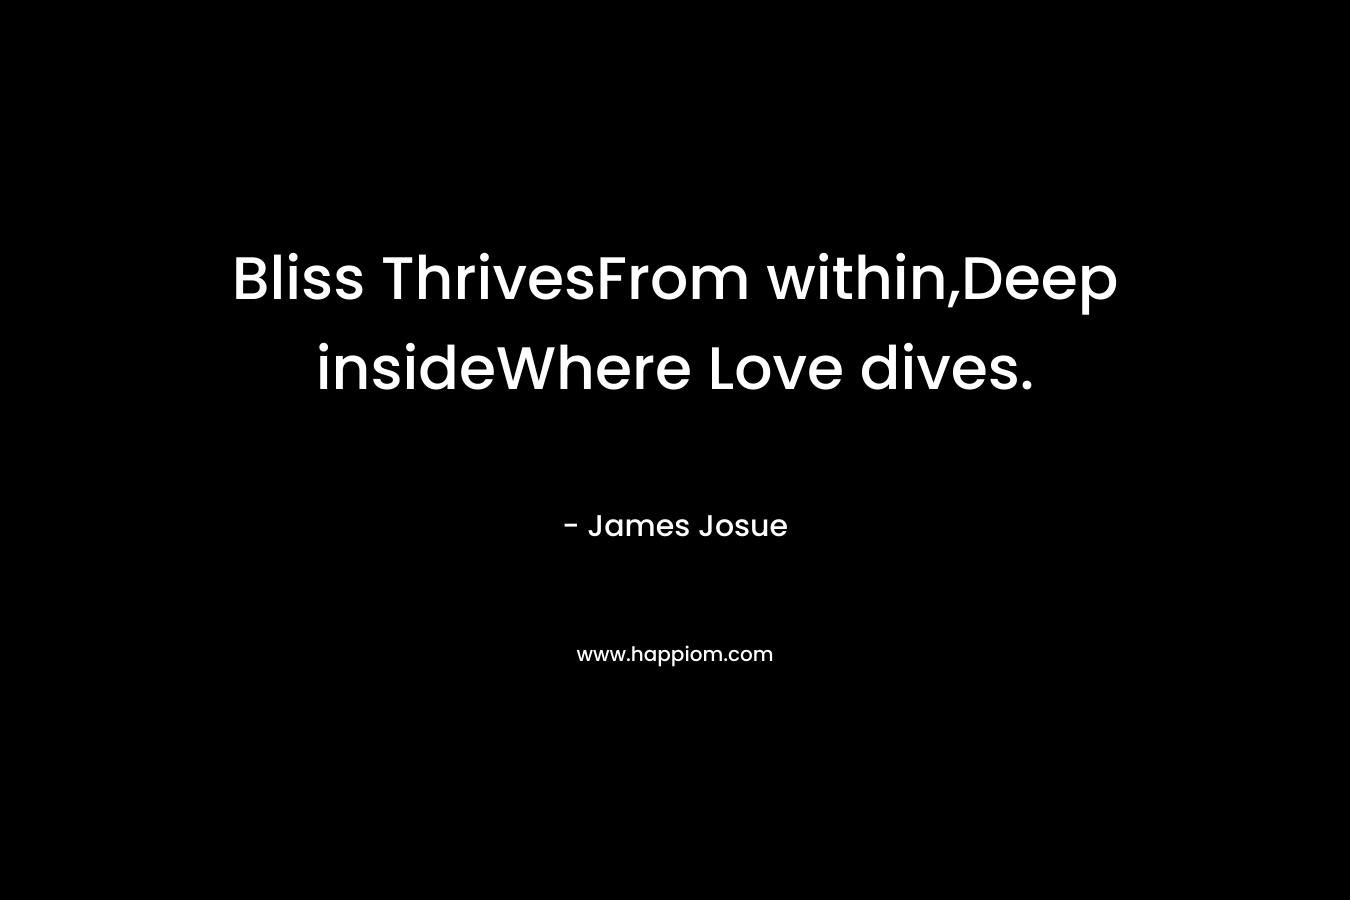 Bliss ThrivesFrom within,Deep insideWhere Love dives. – James Josue